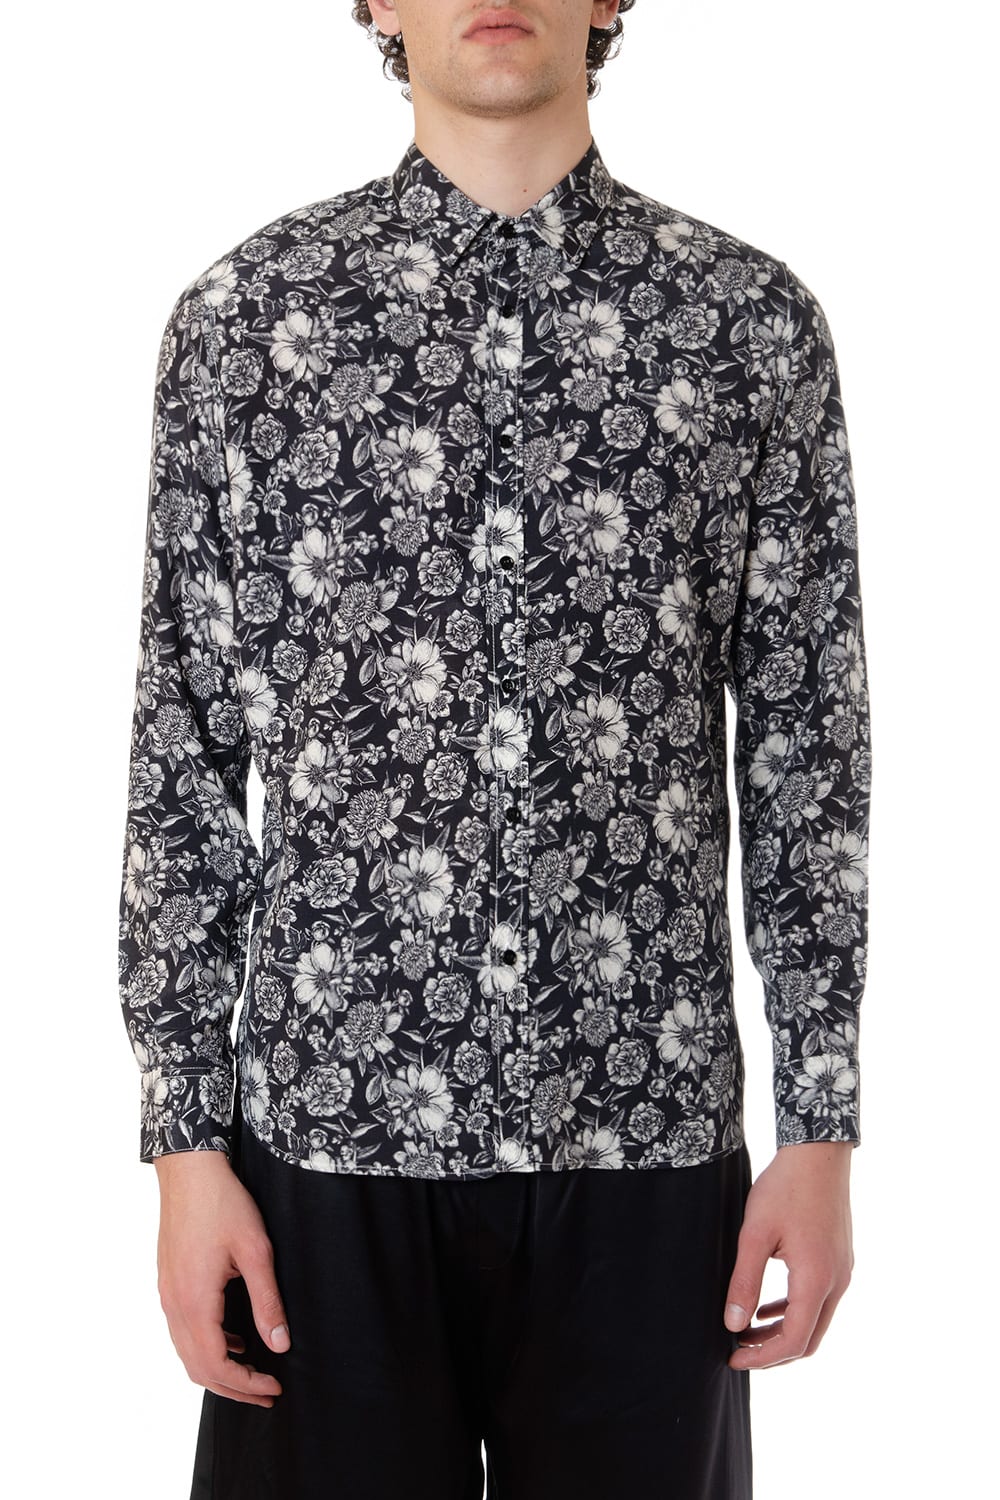 LANEUS BLACK AND WHITE SHIRT WITH FLORAL PRINT,11330839